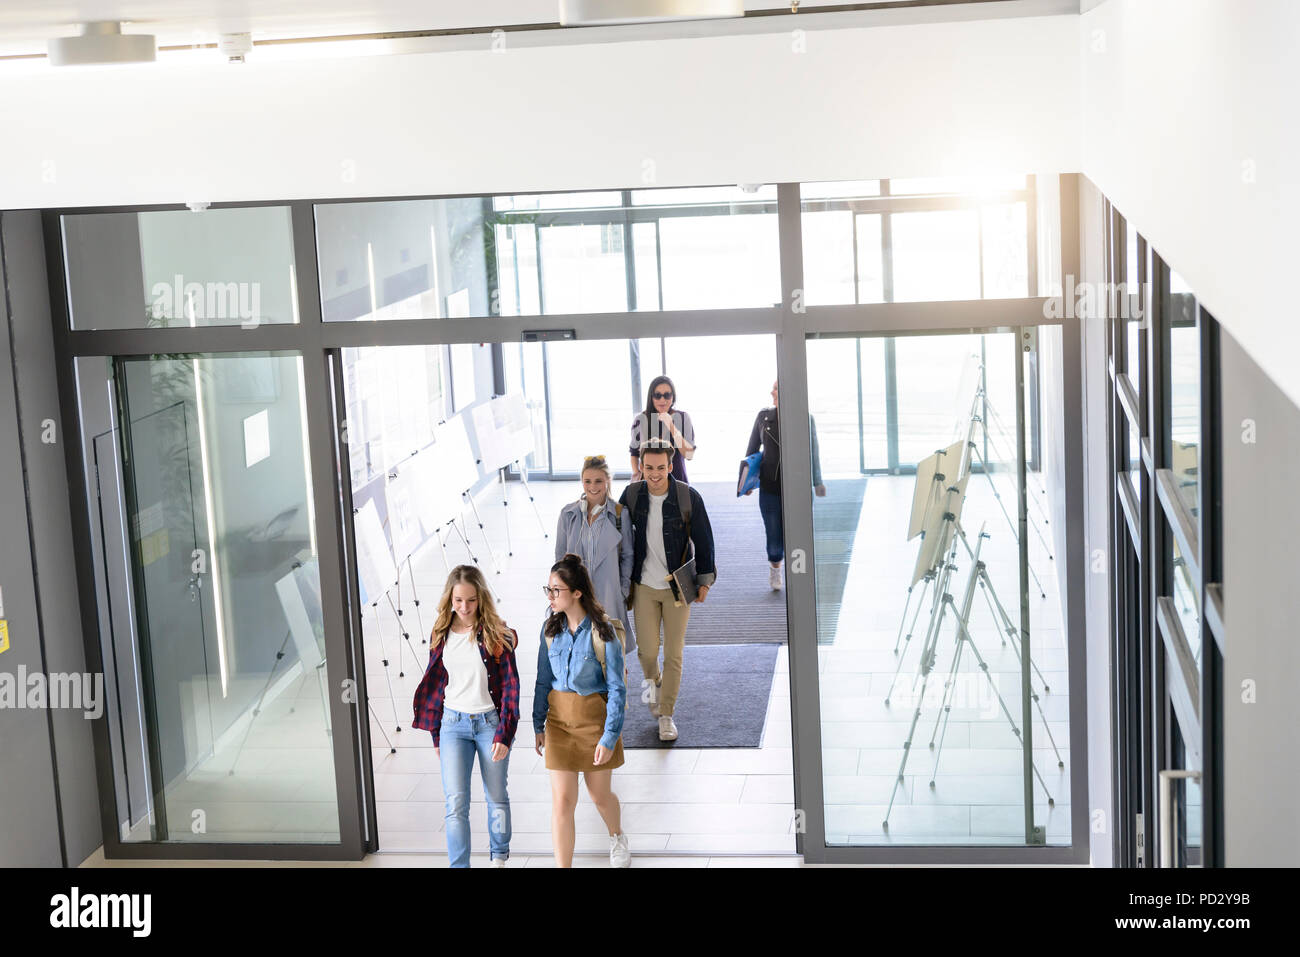 Students entering college building by glass doors Stock Photo